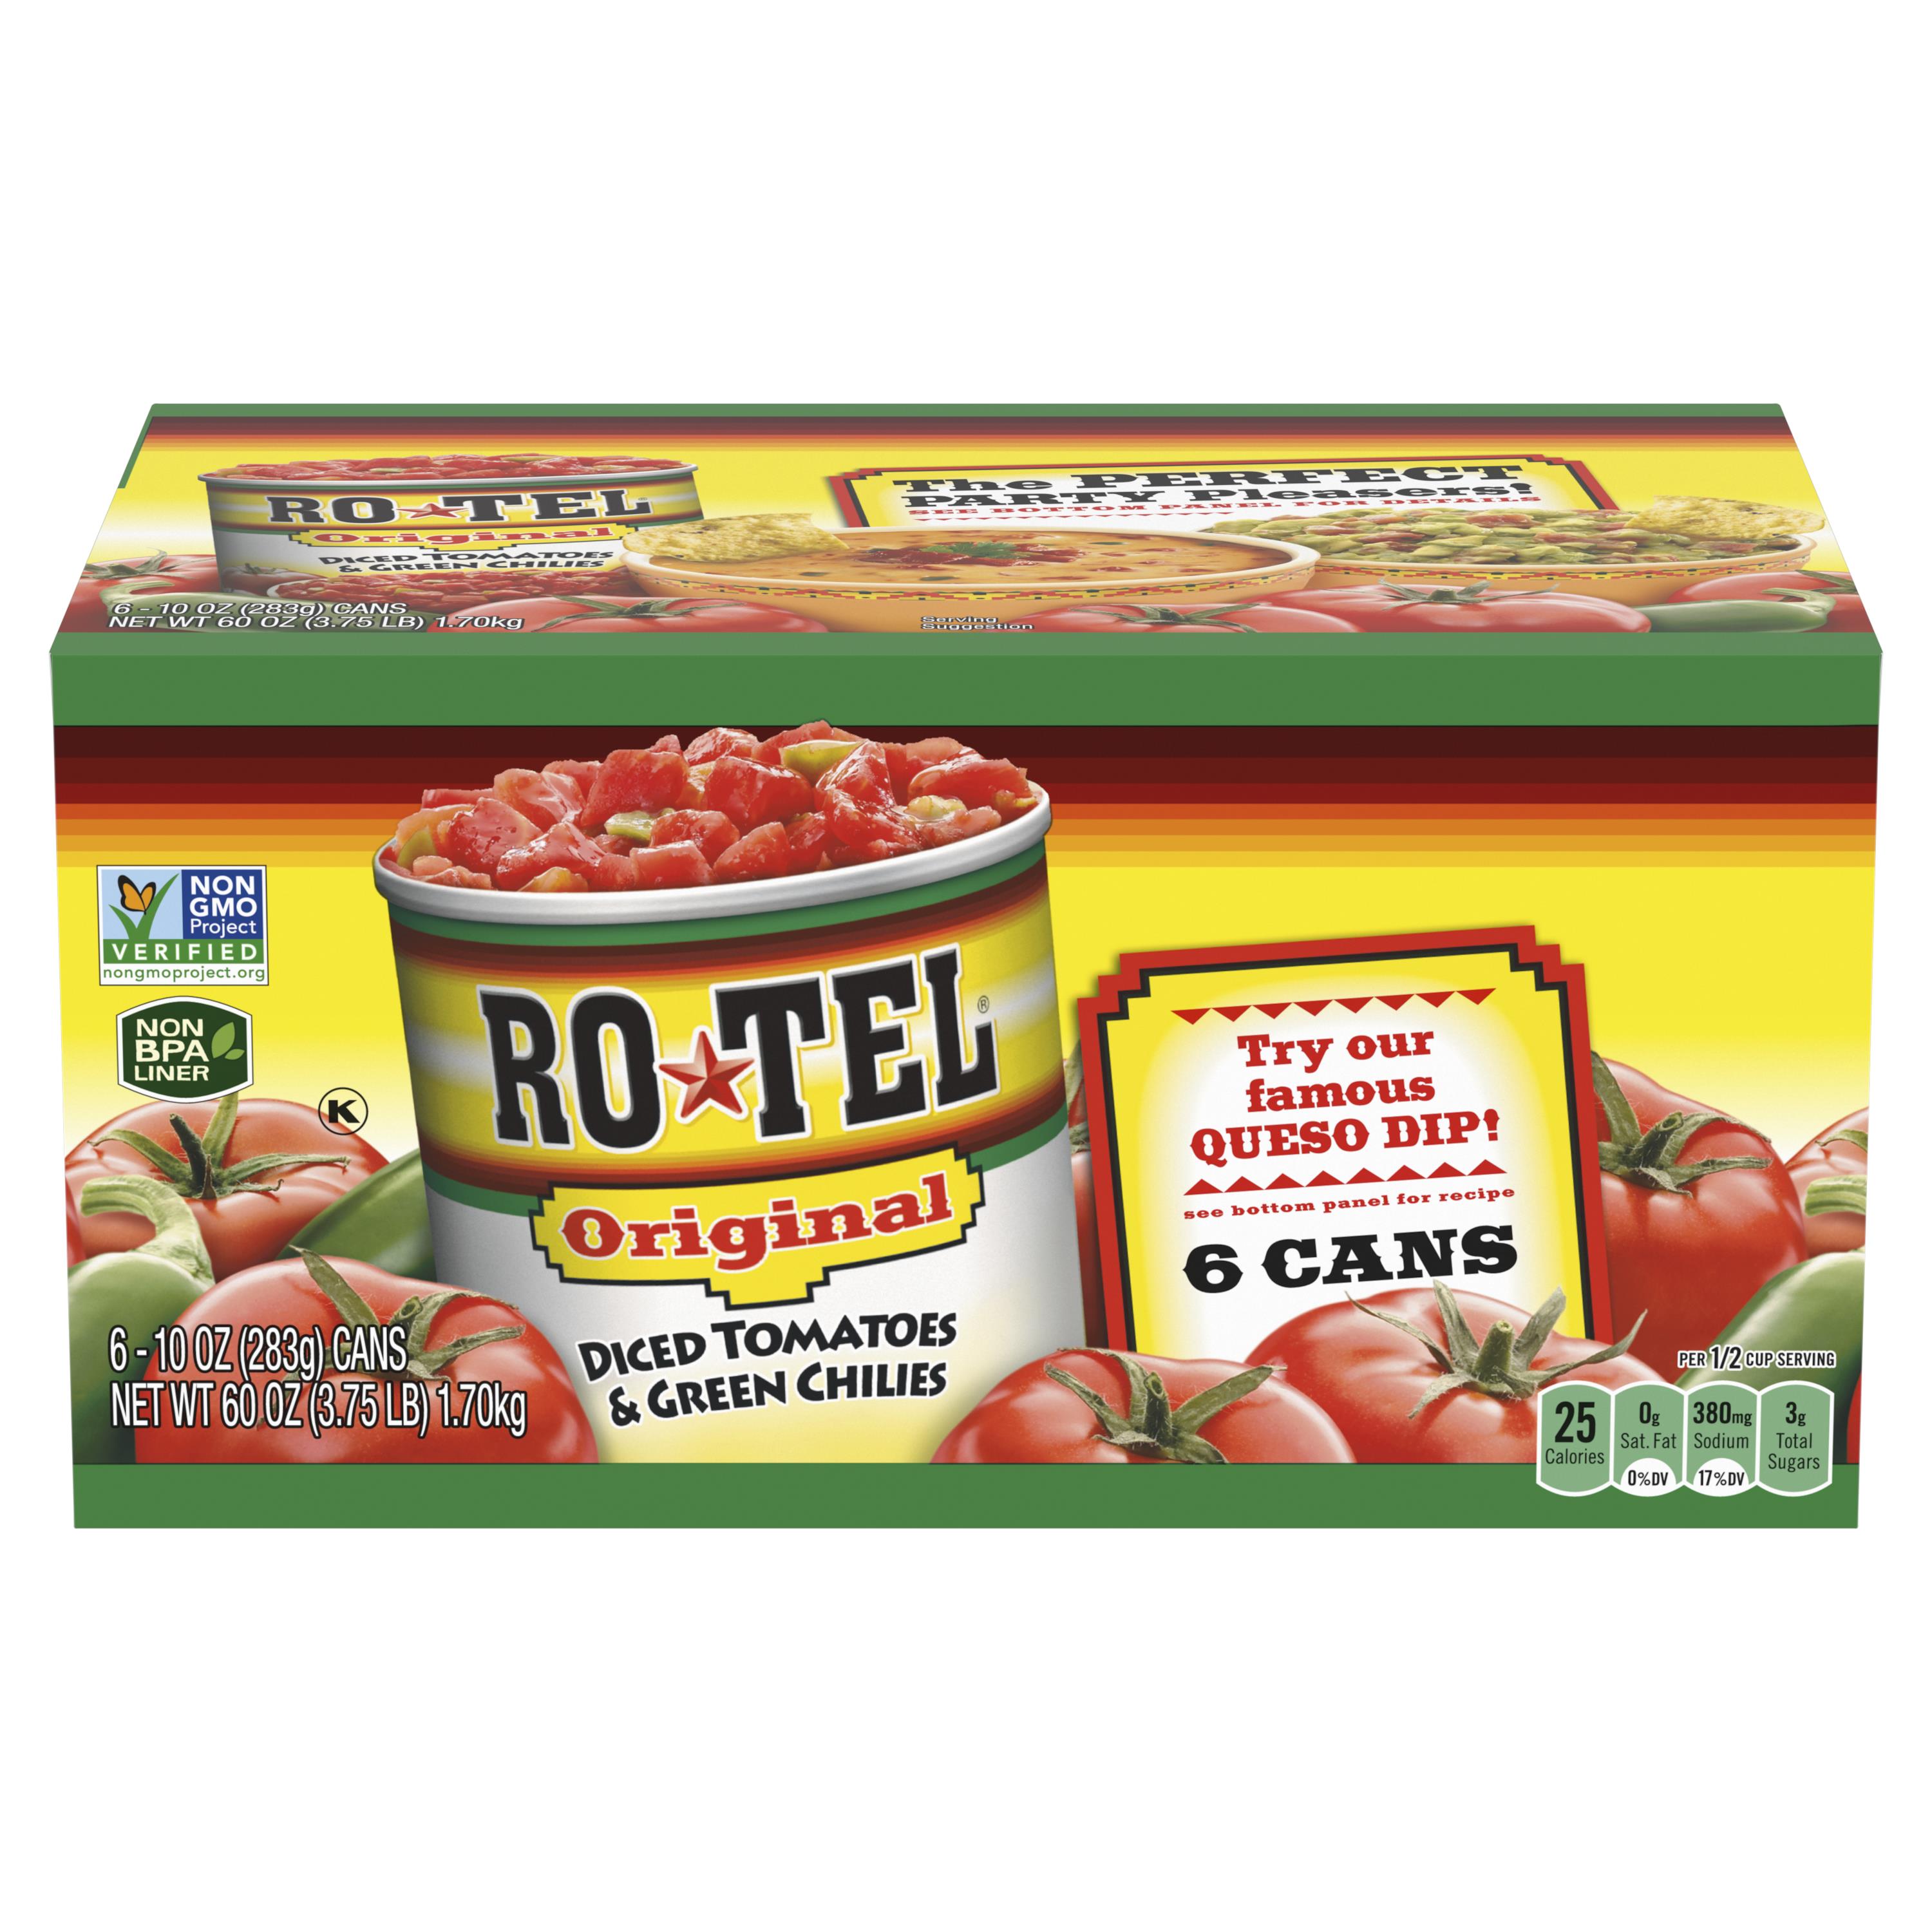 ROTEL Original Diced Tomatoes and Green Chiles, 10 oz. 6-Ct - image 1 of 8